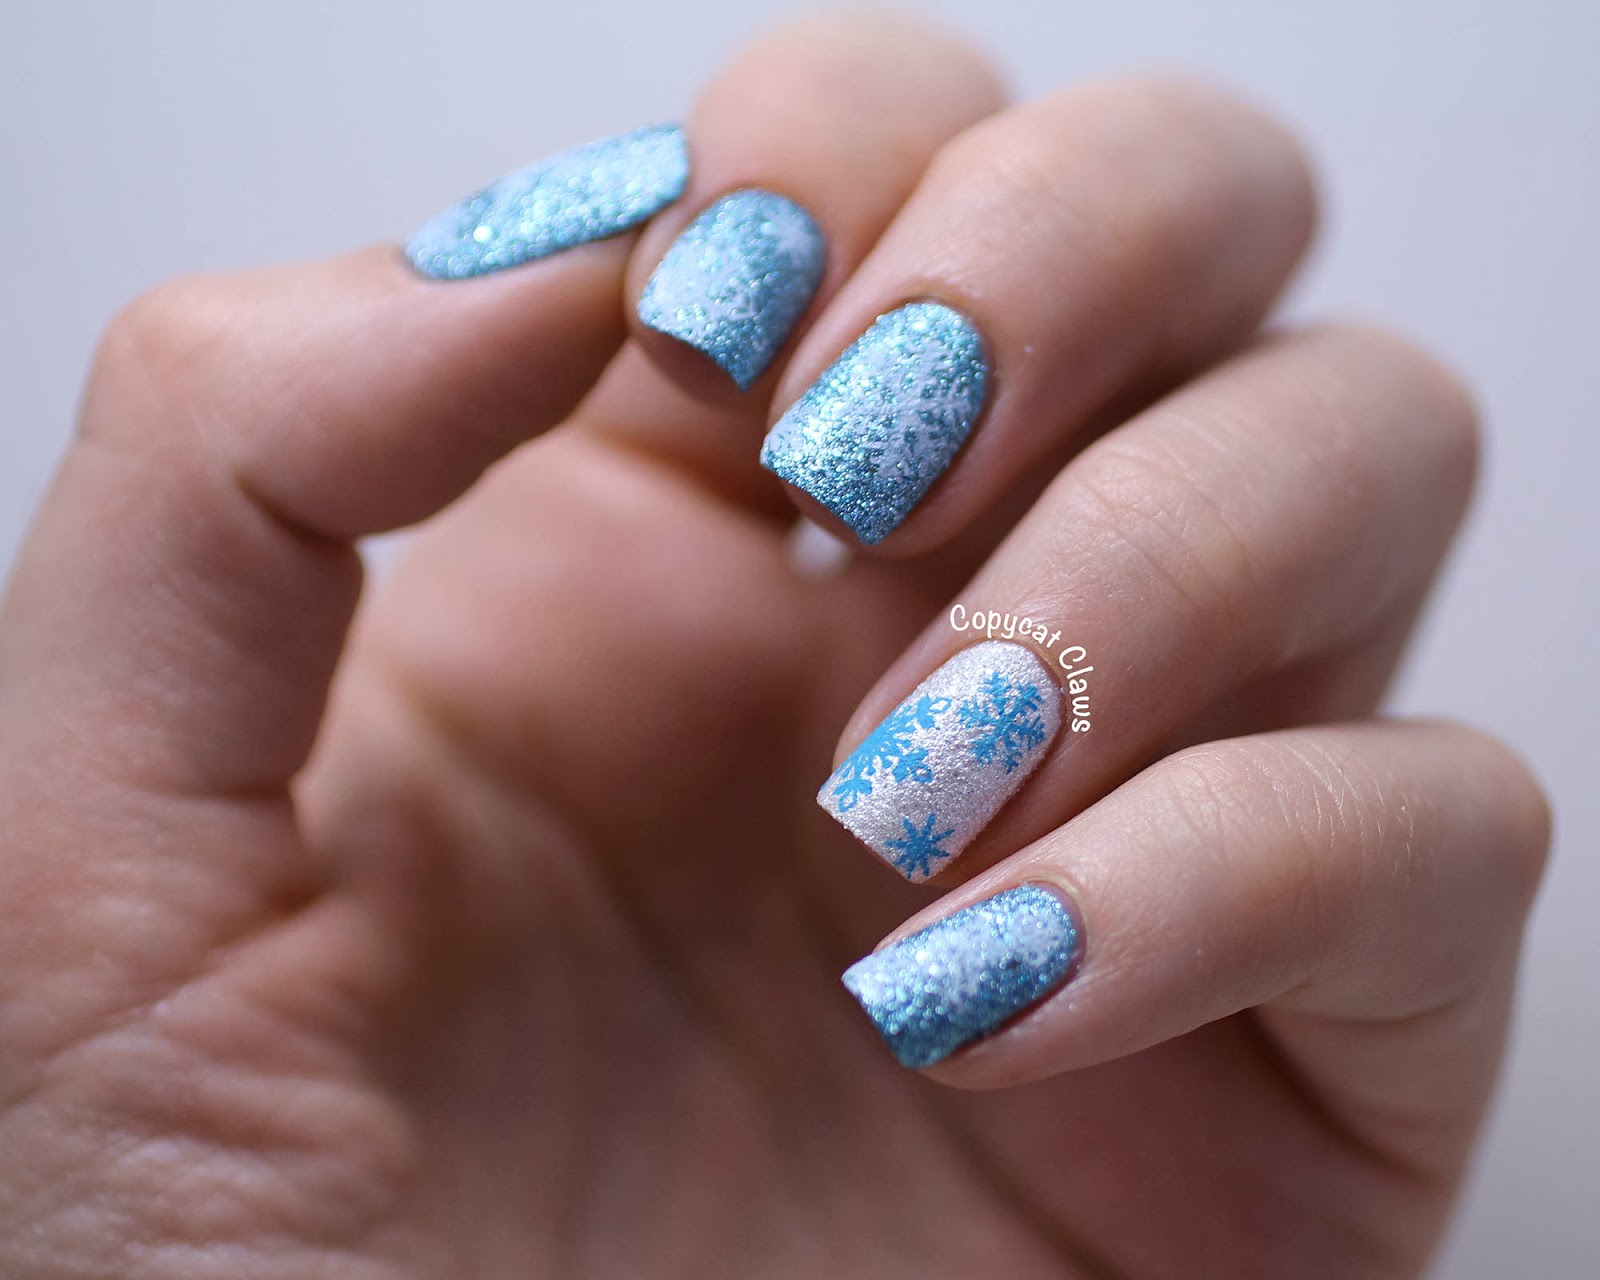 3. "Sophisticated Snowflake Nail Art" - wide 5